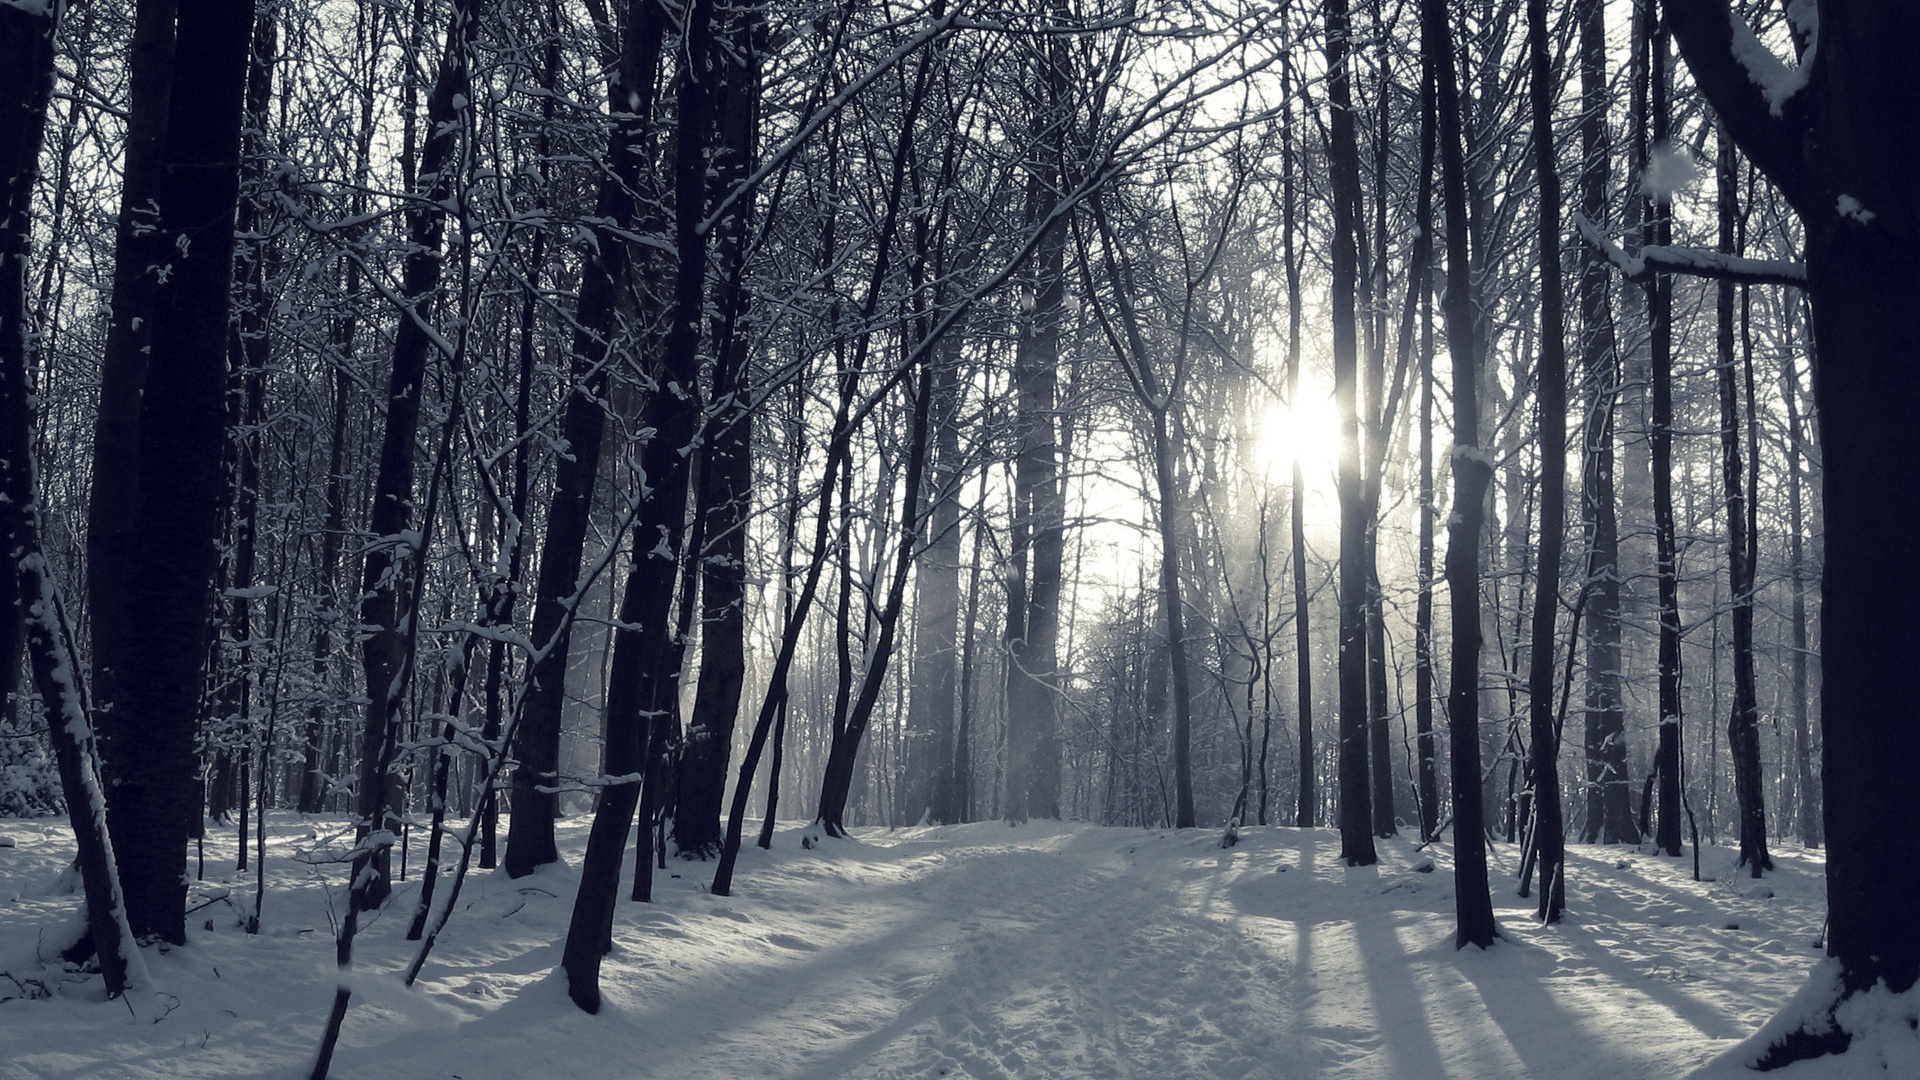 Winter Forest Night Wallpaper Image Outdoors Wallpaper 1080p